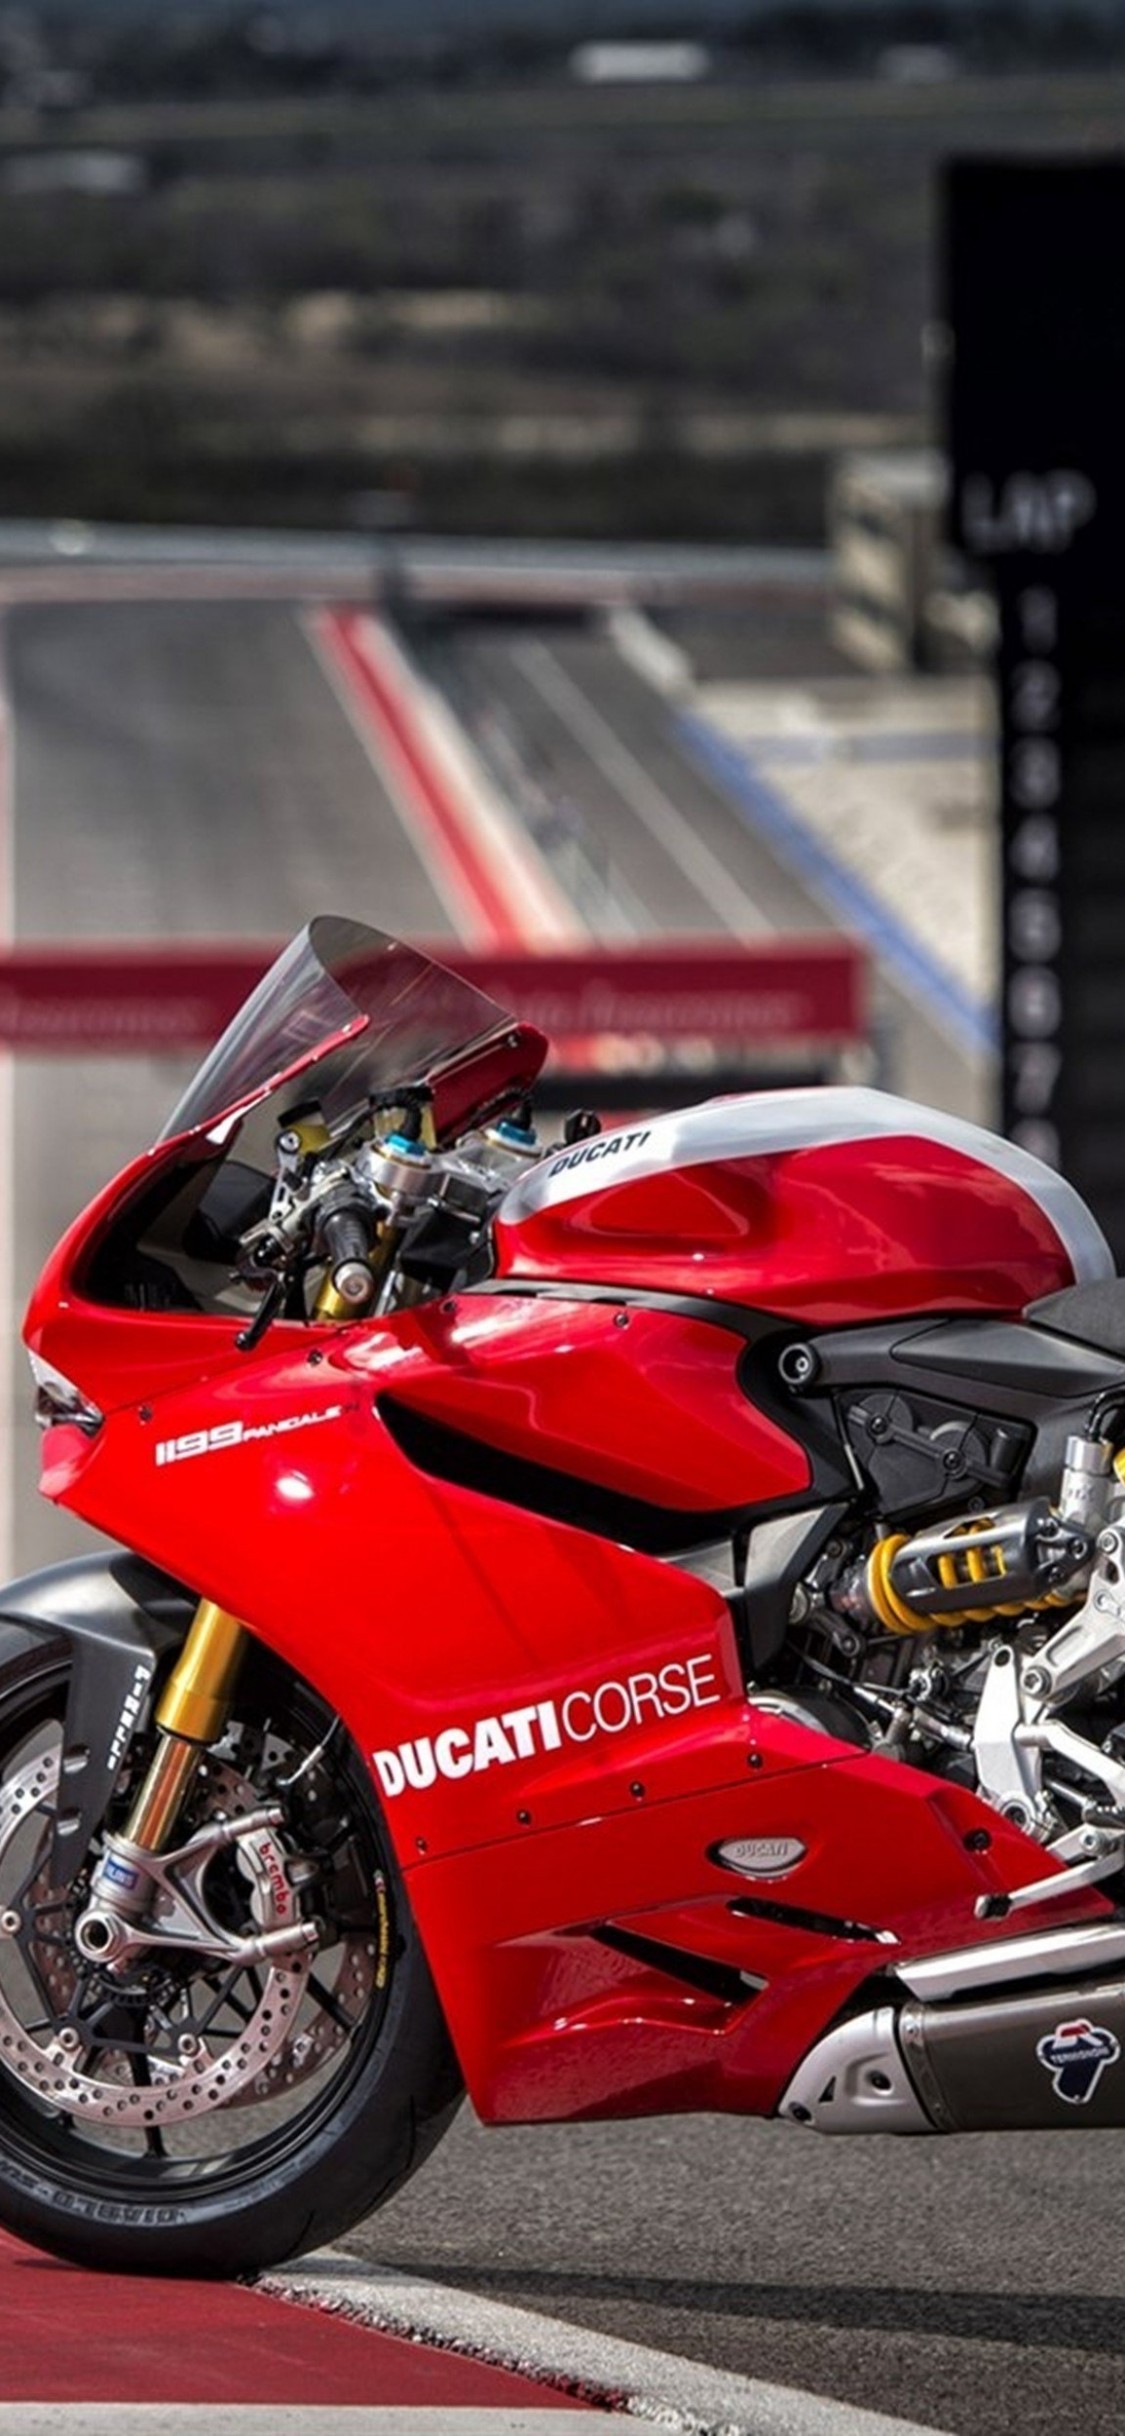 Ducati 1199 Panigale R, Red, Motorcycle - Ducati 1199 Panigale , HD Wallpaper & Backgrounds